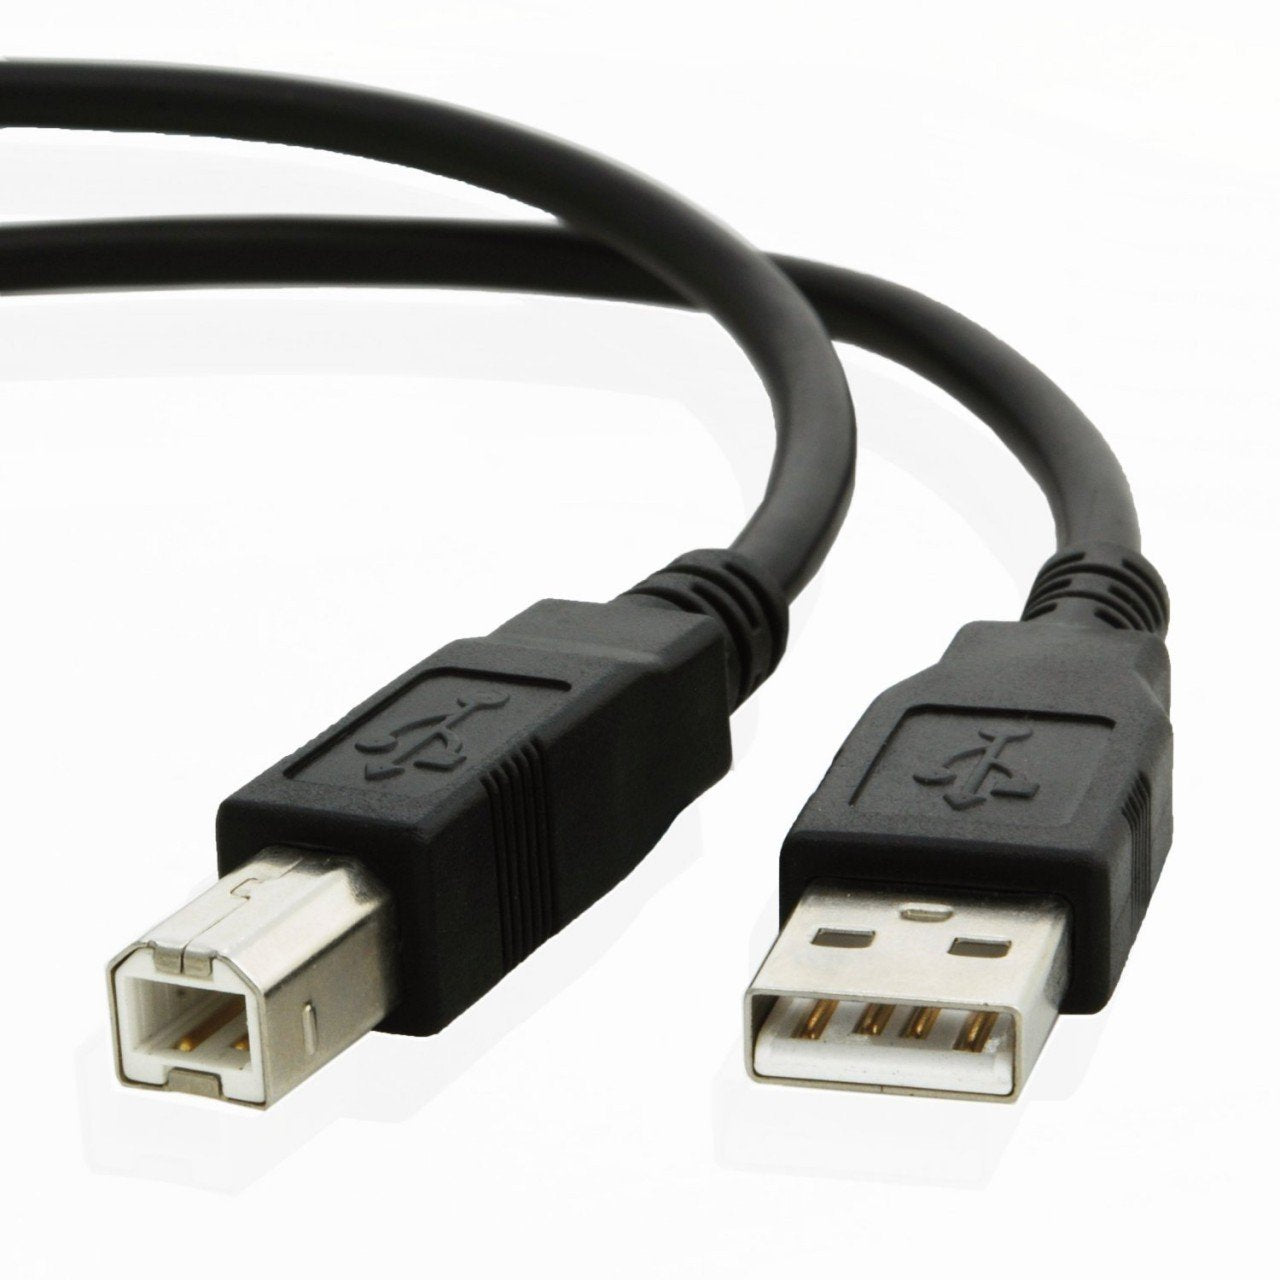 USB cable for Epson WORKFORCE WF-7620